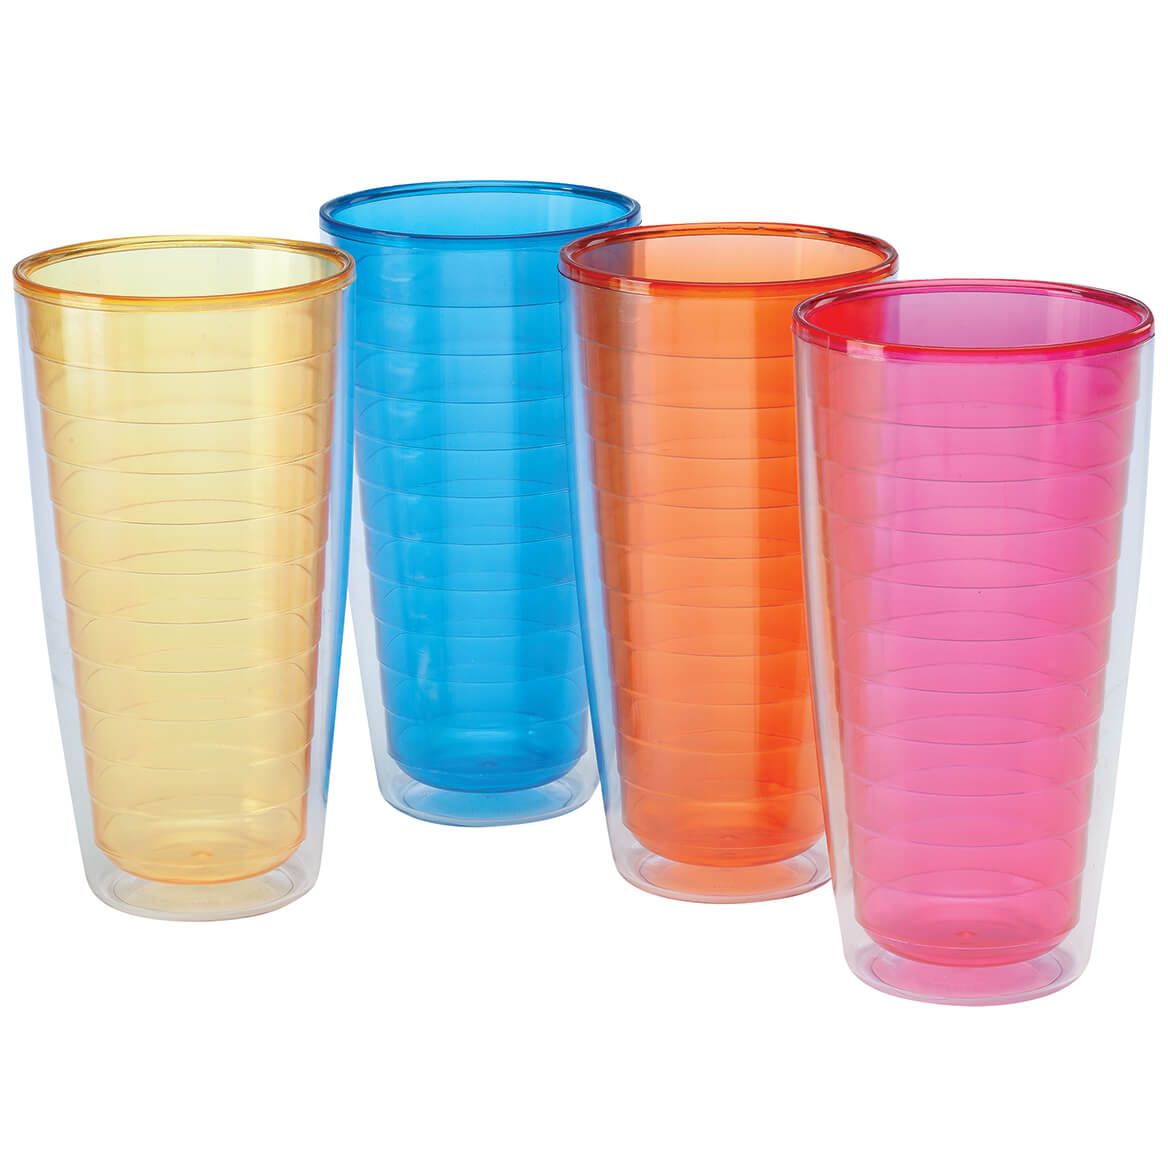 Rainbow Insulated Tumblers by Home Marketplace, Set of 4 + '-' + 374401